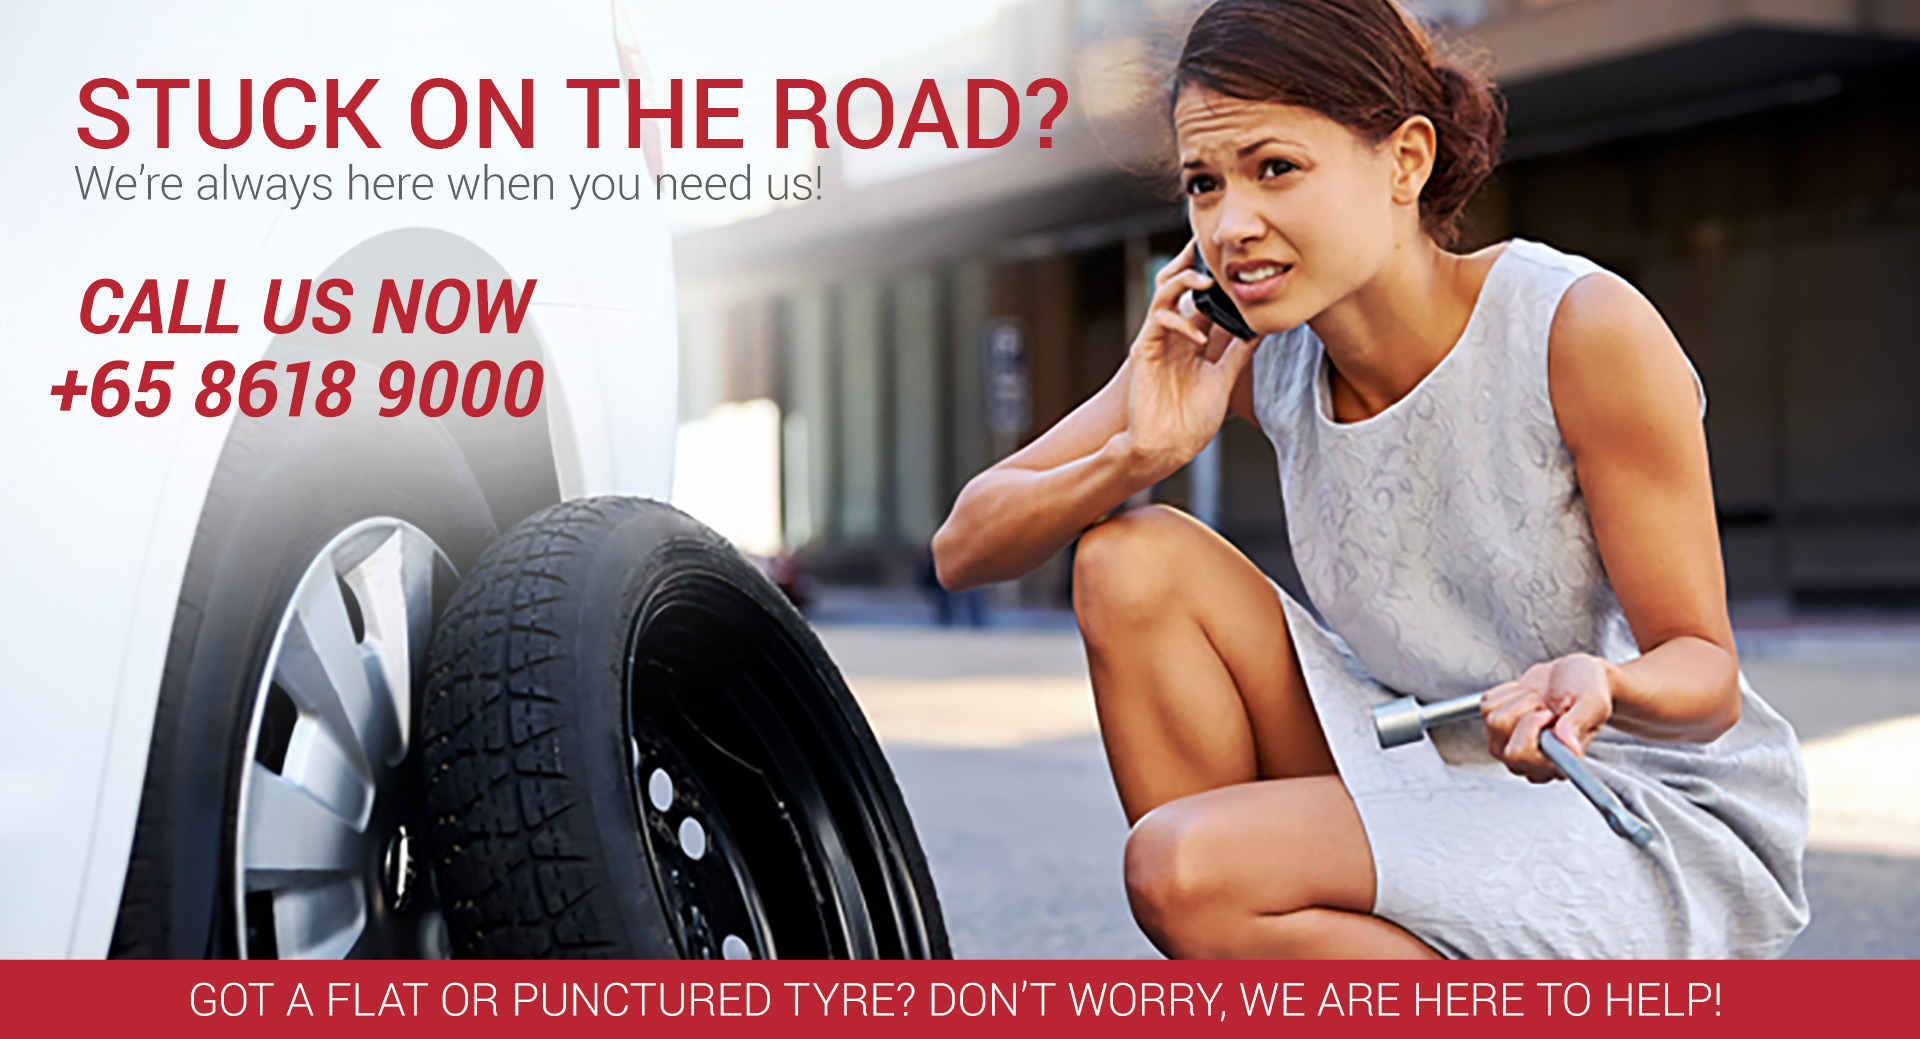 24Hrs Onsite Car Tyre Repair Service in Singapore Flat Tyre No More